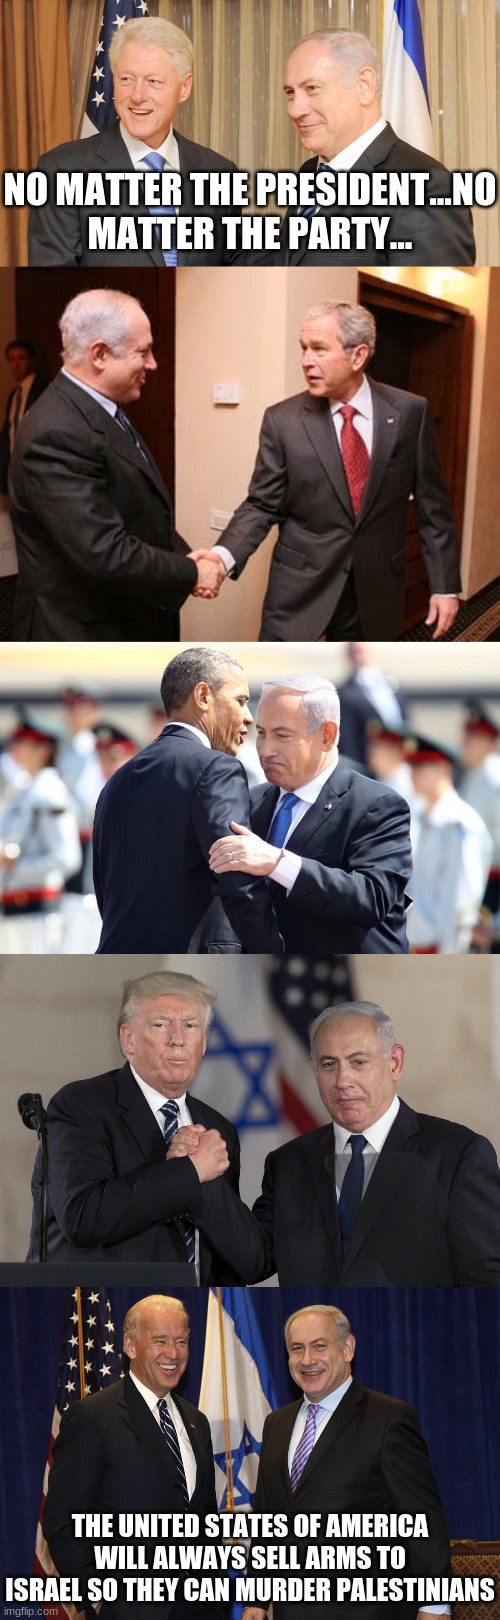 Boycott, Divest Sanction | NO MATTER THE PRESIDENT...NO MATTER THE PARTY... THE UNITED STATES OF AMERICA WILL ALWAYS SELL ARMS TO ISRAEL SO THEY CAN MURDER PALESTINIANS | image tagged in clinton and netanyahu,bush and netanyahu,obama and netanyahu,trump and netanyahu,biden and netanyahu,free palestine | made w/ Imgflip meme maker